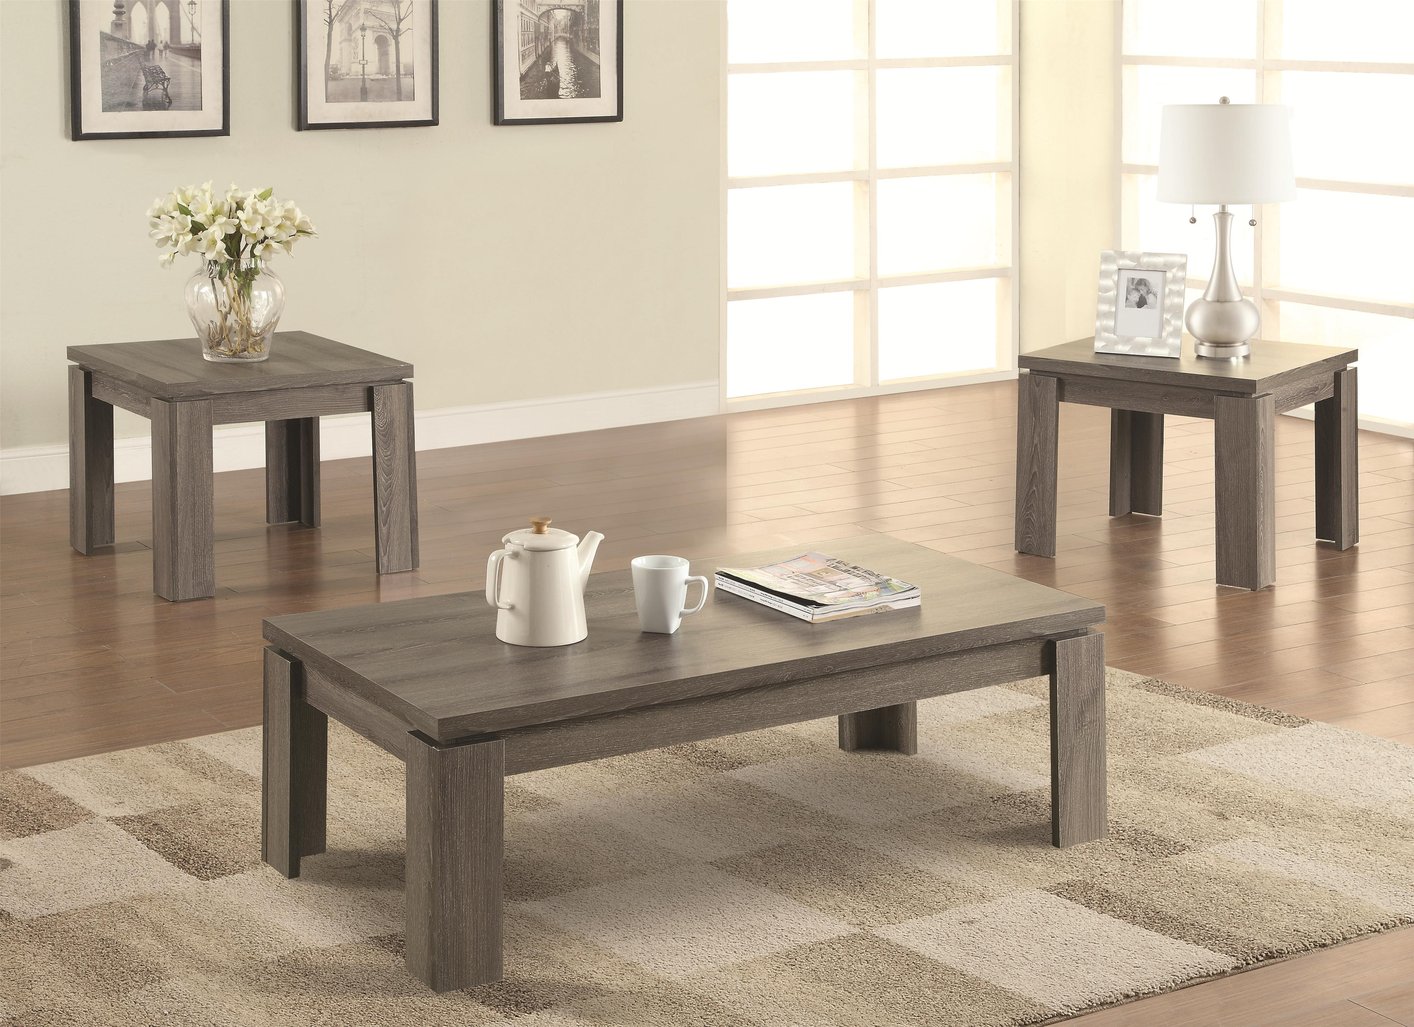 grey wood coffee table set steal sofa furniture los living room accent sets home office edmonton futon mattress covers inch round plastic tablecloth accessory tables sliding barn